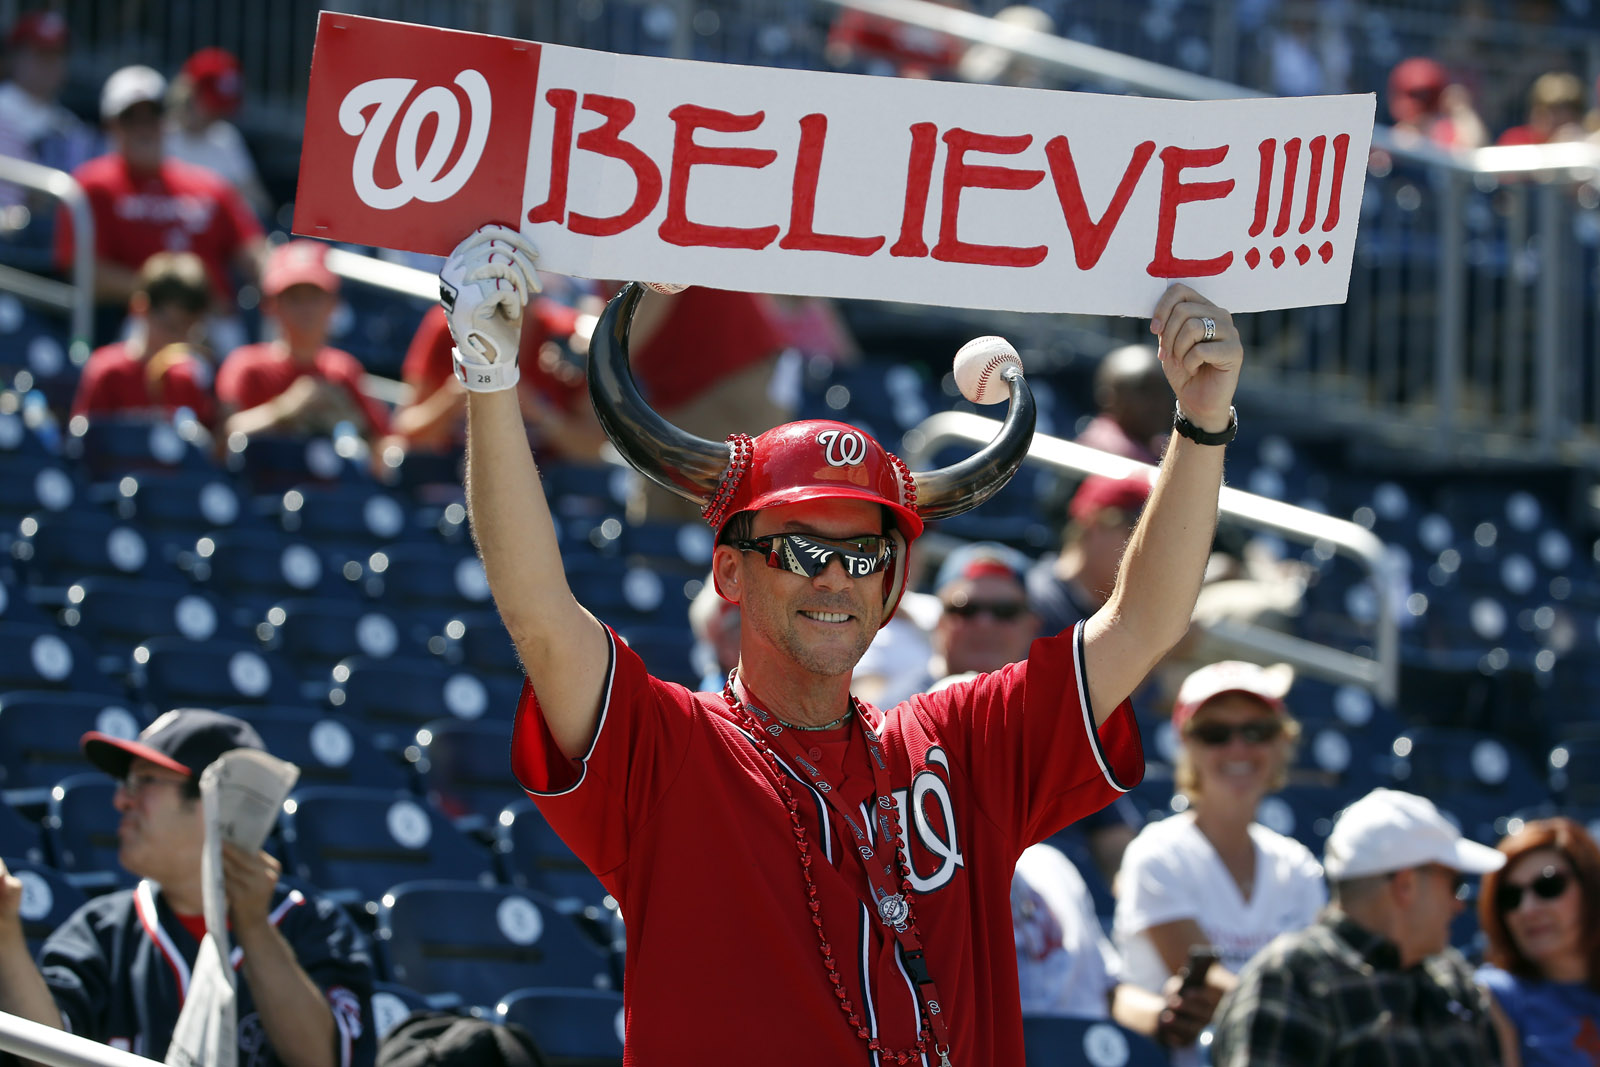 Nats to host 2 home exhibition games WTOP News